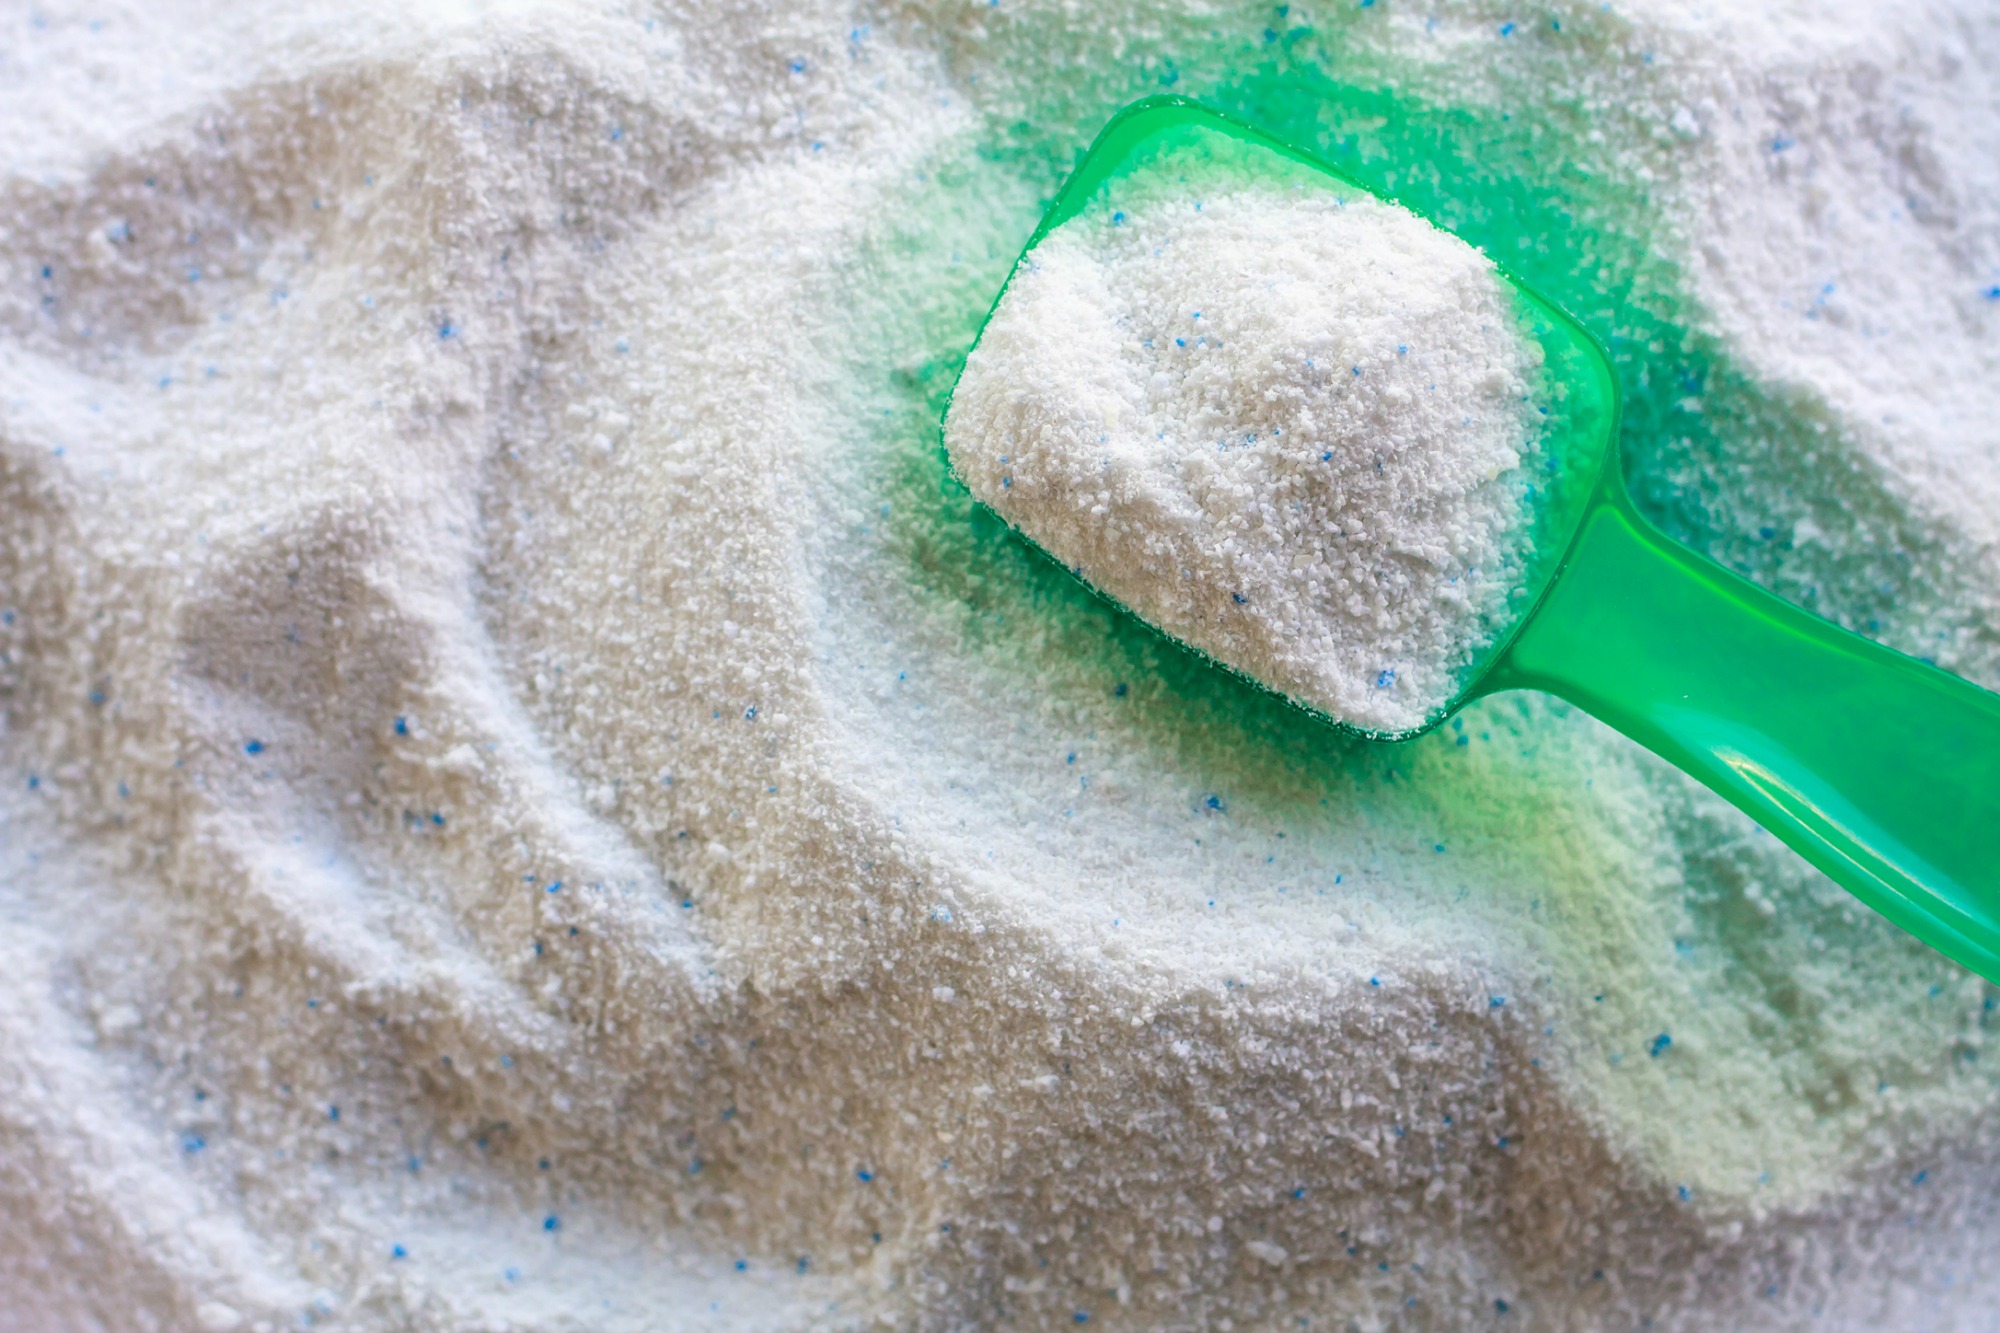 Feeling rash? Could your laundry detergent be causing your skin allergies